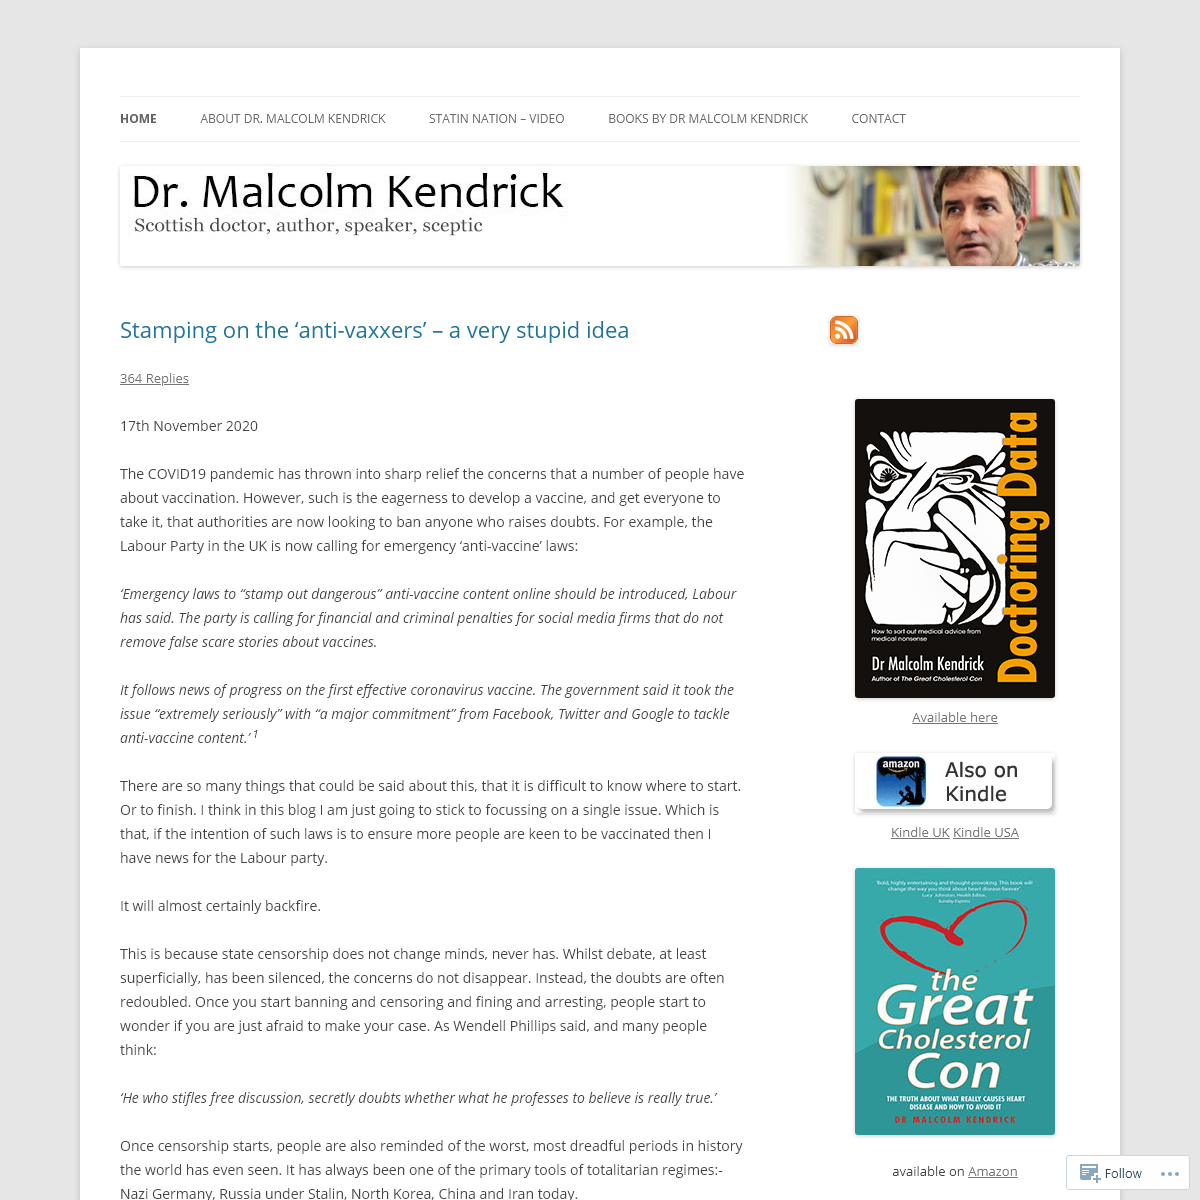 A complete backup of drmalcolmkendrick.org